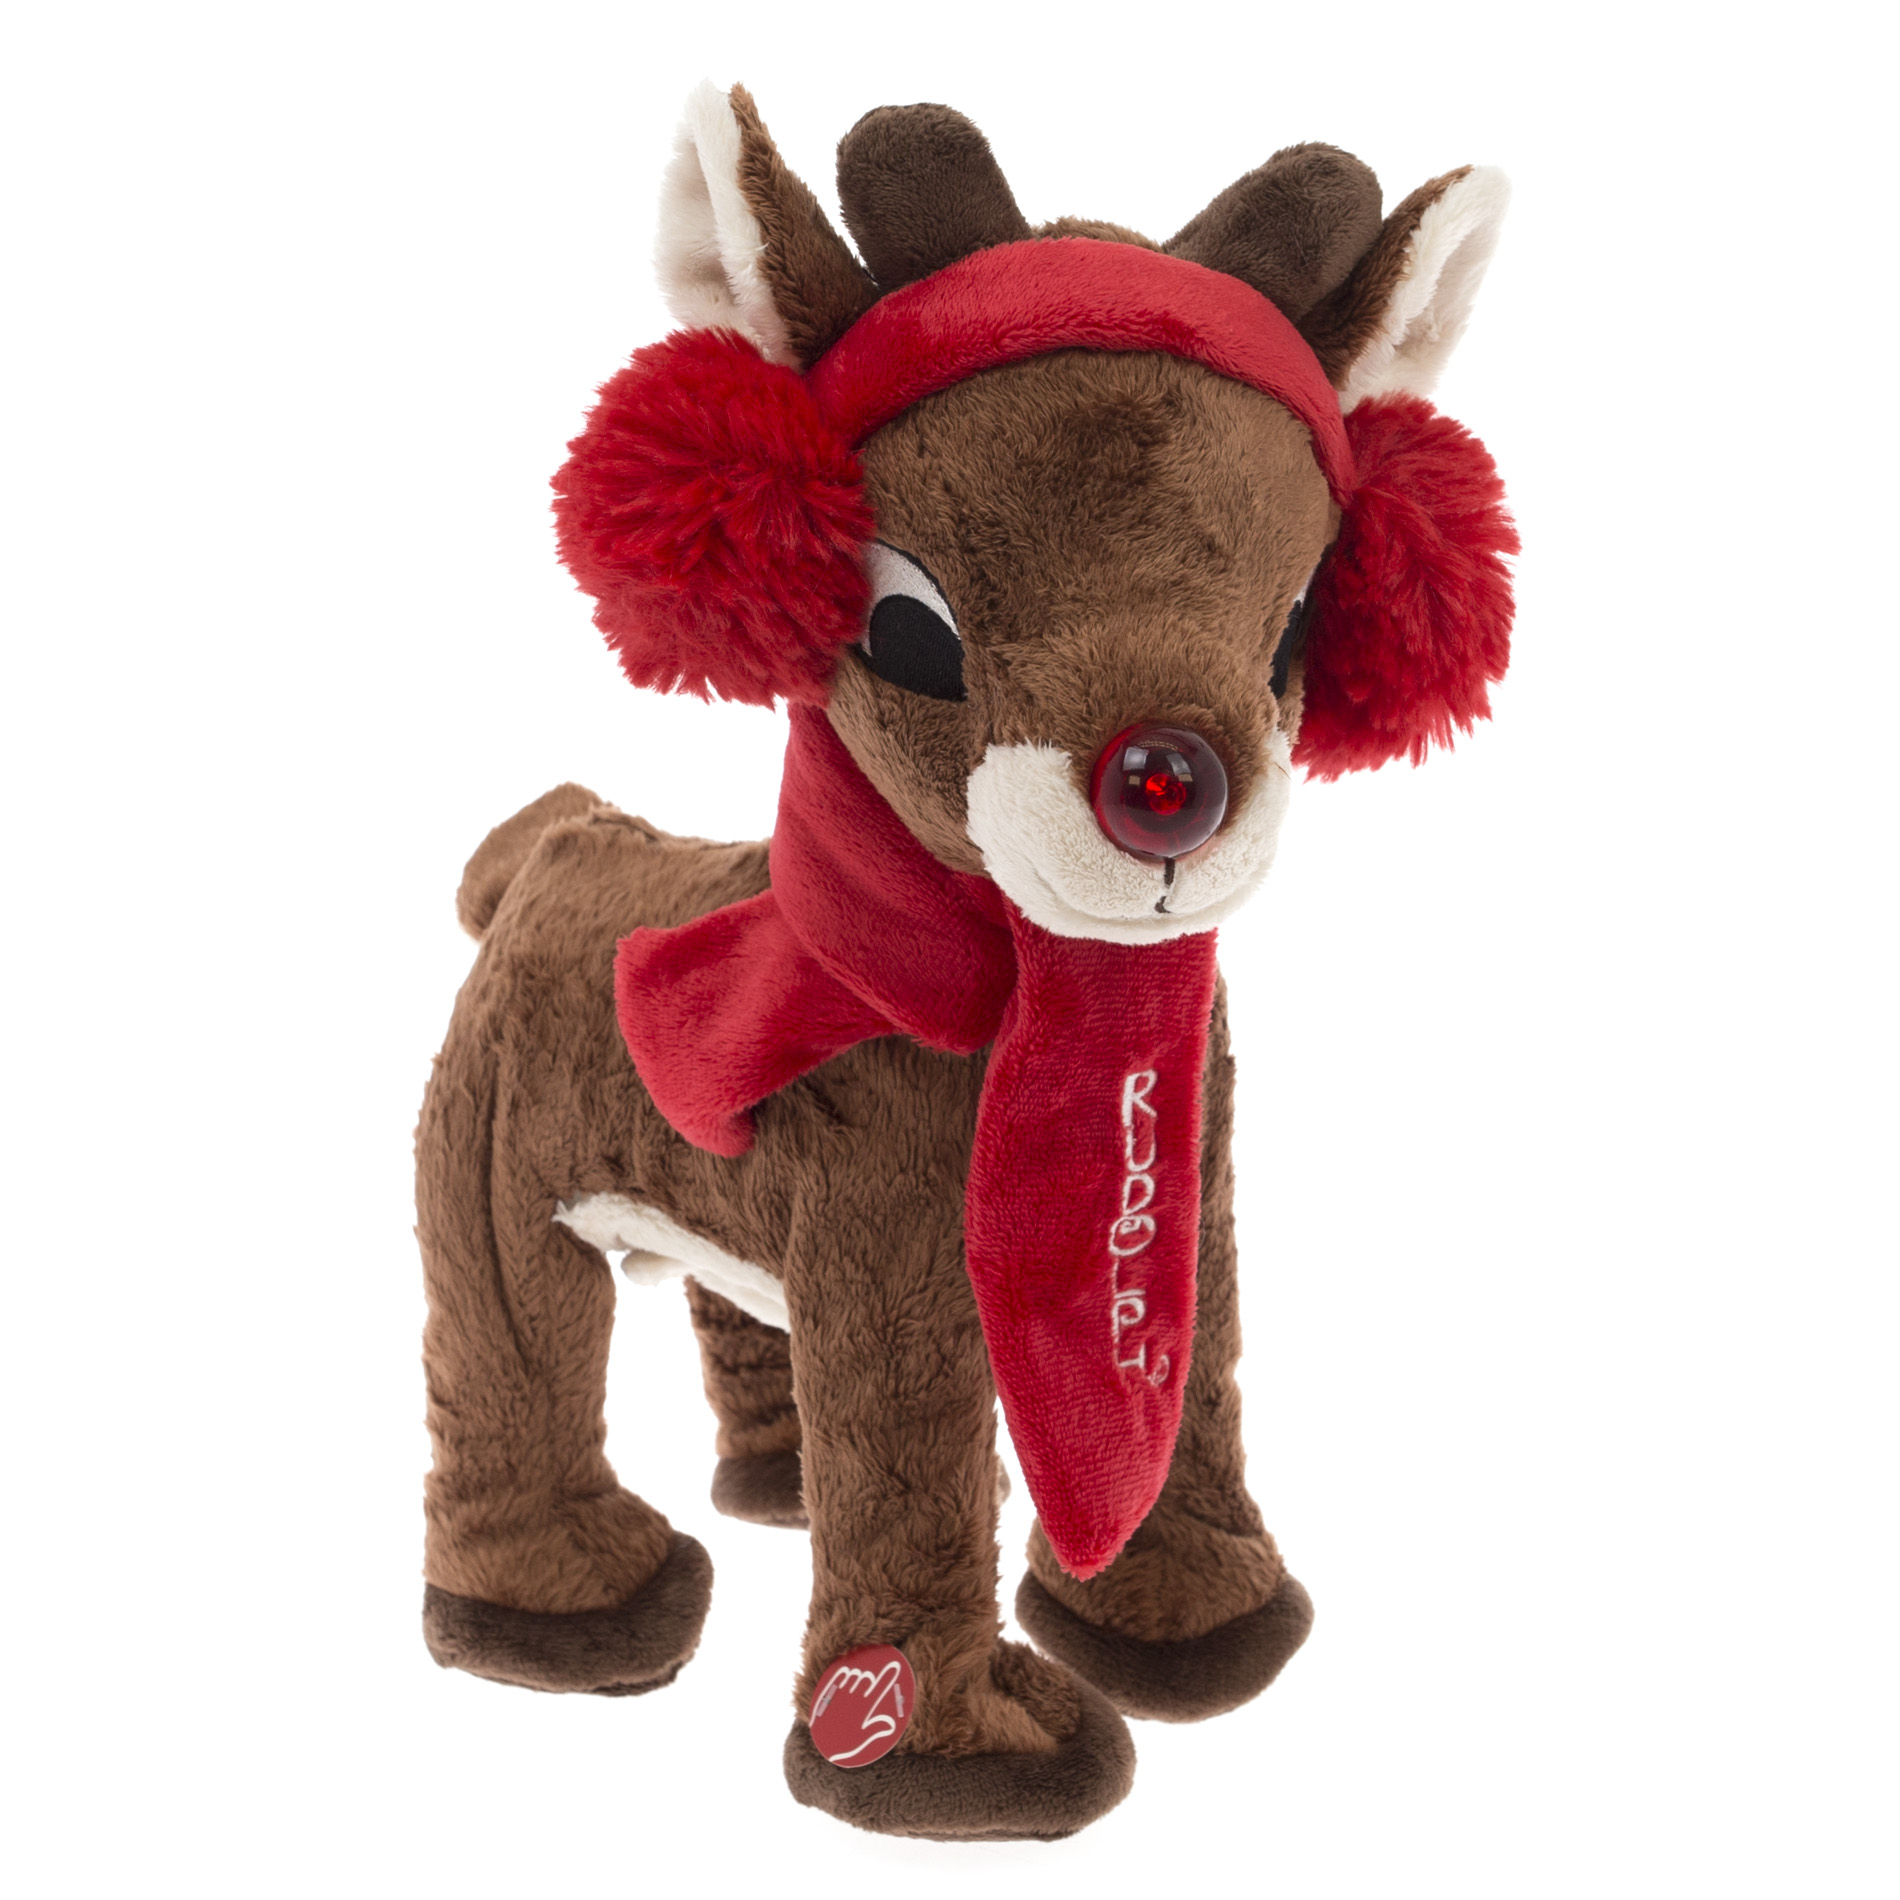 Rudolph the Red Nose Reindeer 12" Plush Singing and Walking Rudolf with Earmuffs